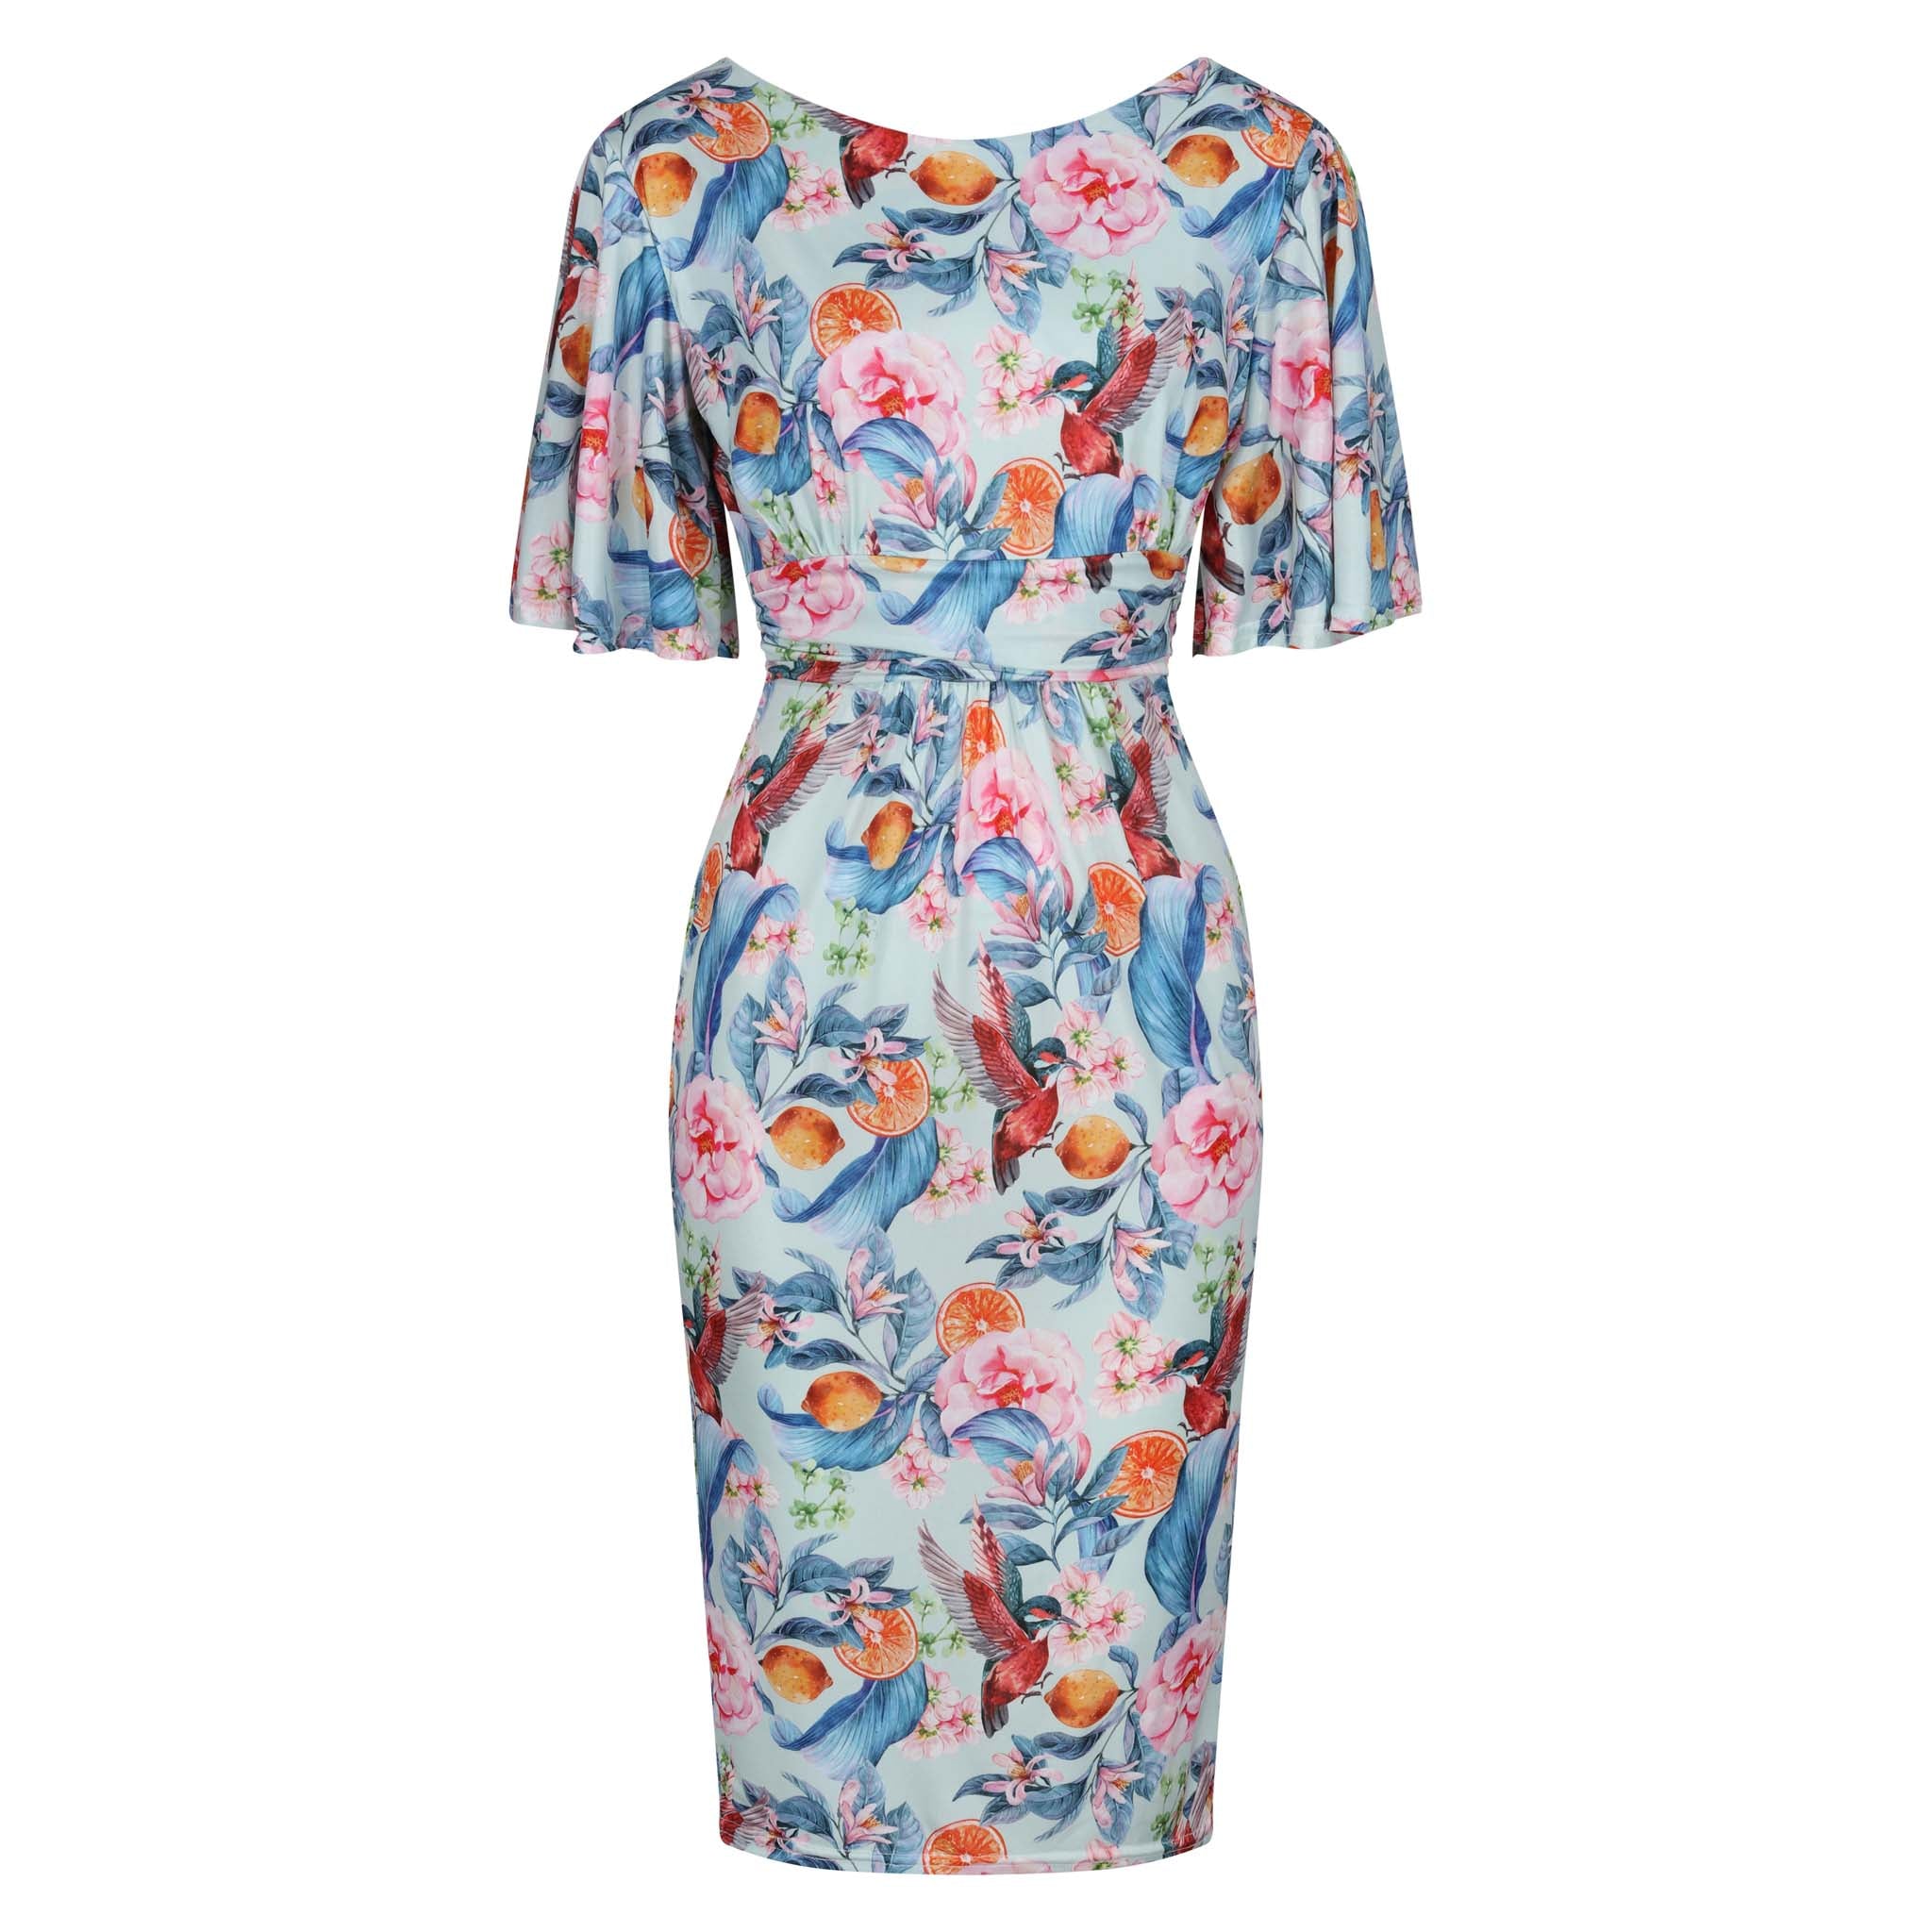 Blue Tropical Floral Fruit Print Waterfall Sleeve Bodycon Pencil Dress